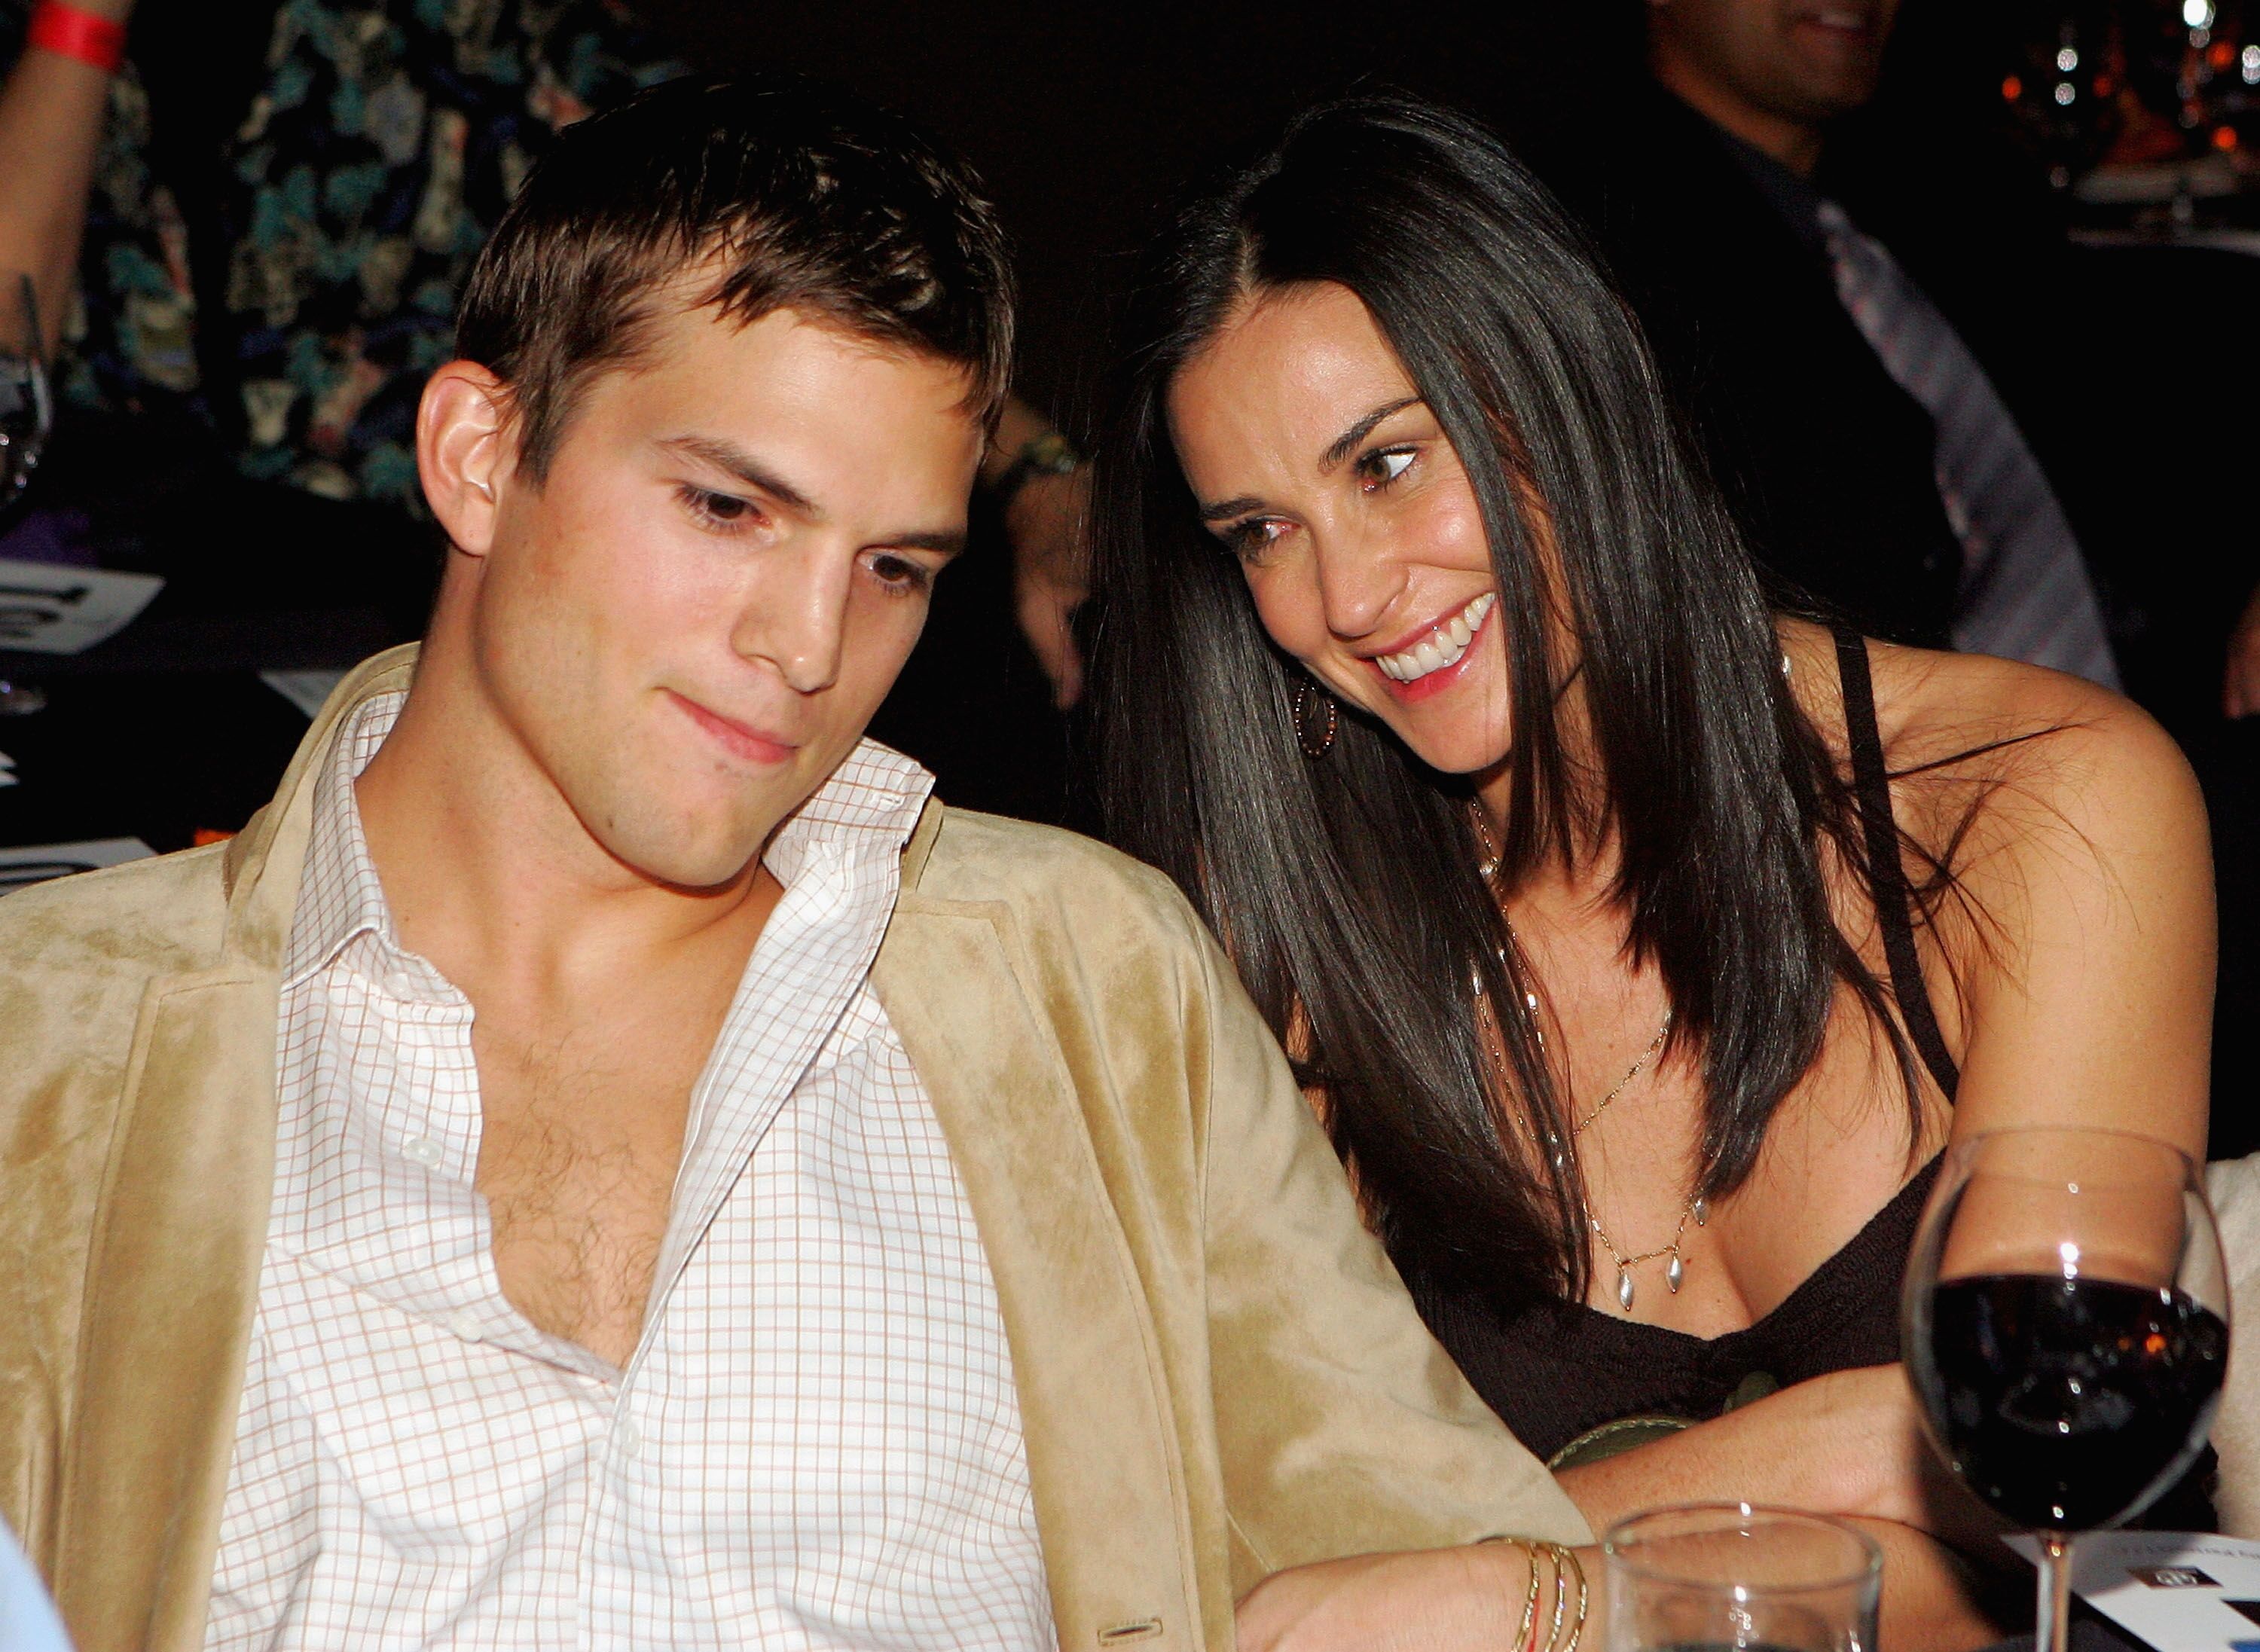 Ashton Kutcher and Demi Moore during Ubid.com Joins Forces with Hollywood Stars to Launch Celebrity Auction to Benefit Hurricane Victims. | Source: Getty Images